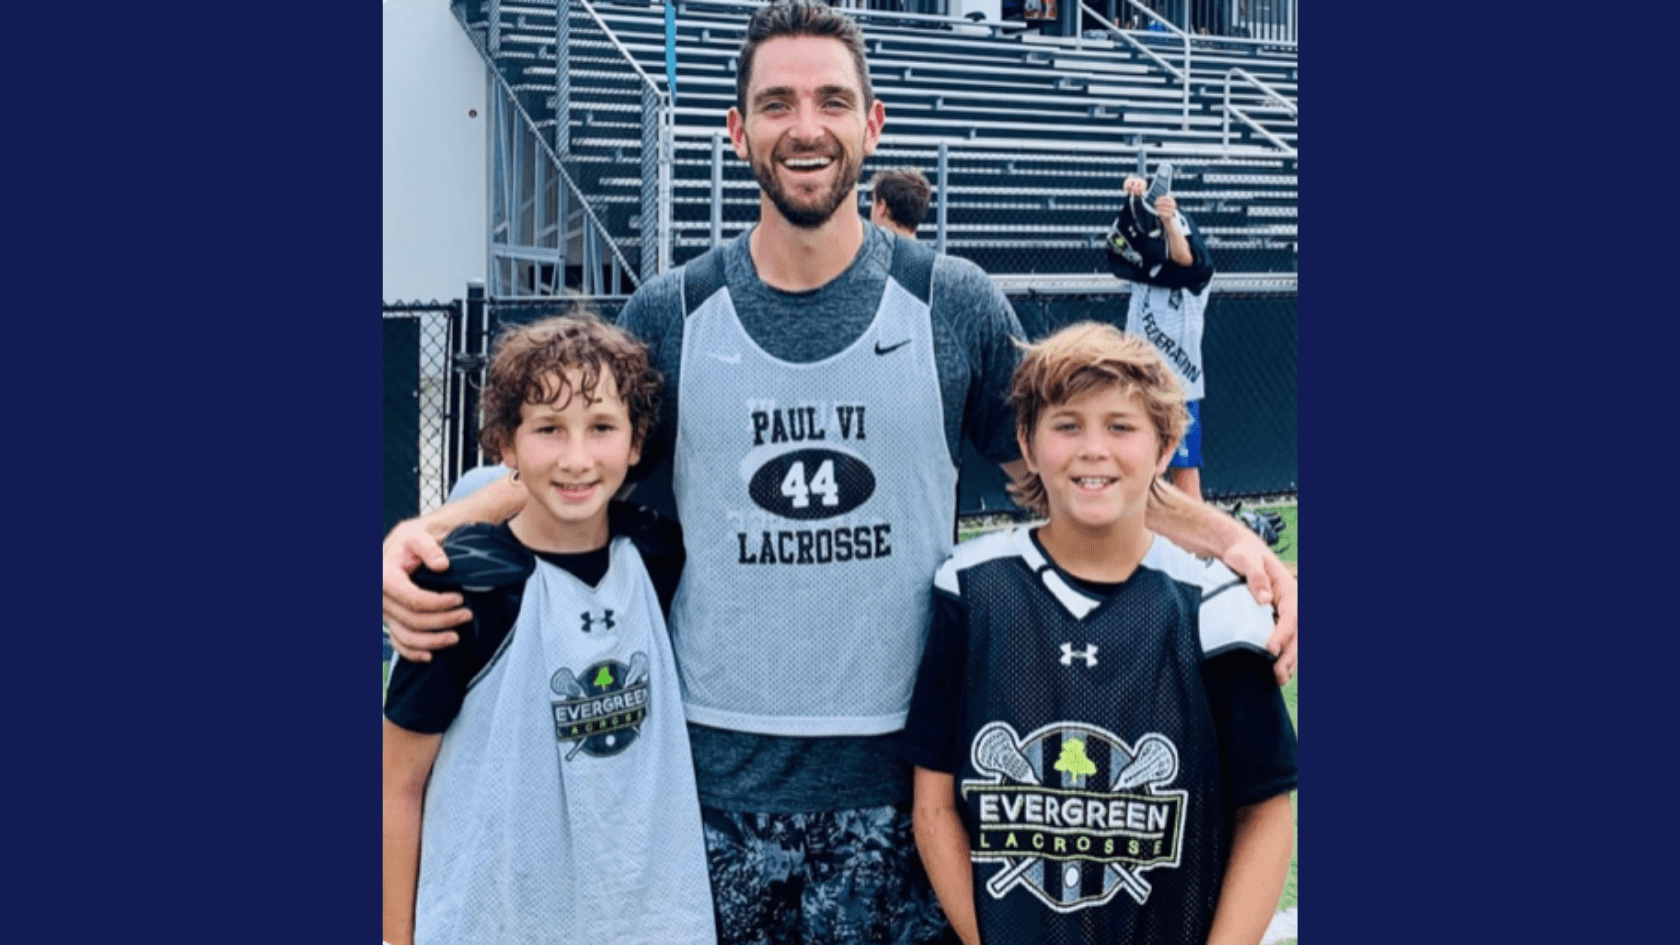 Sources of Strength Trainer Coach Mike Mabry with two lacrosse players